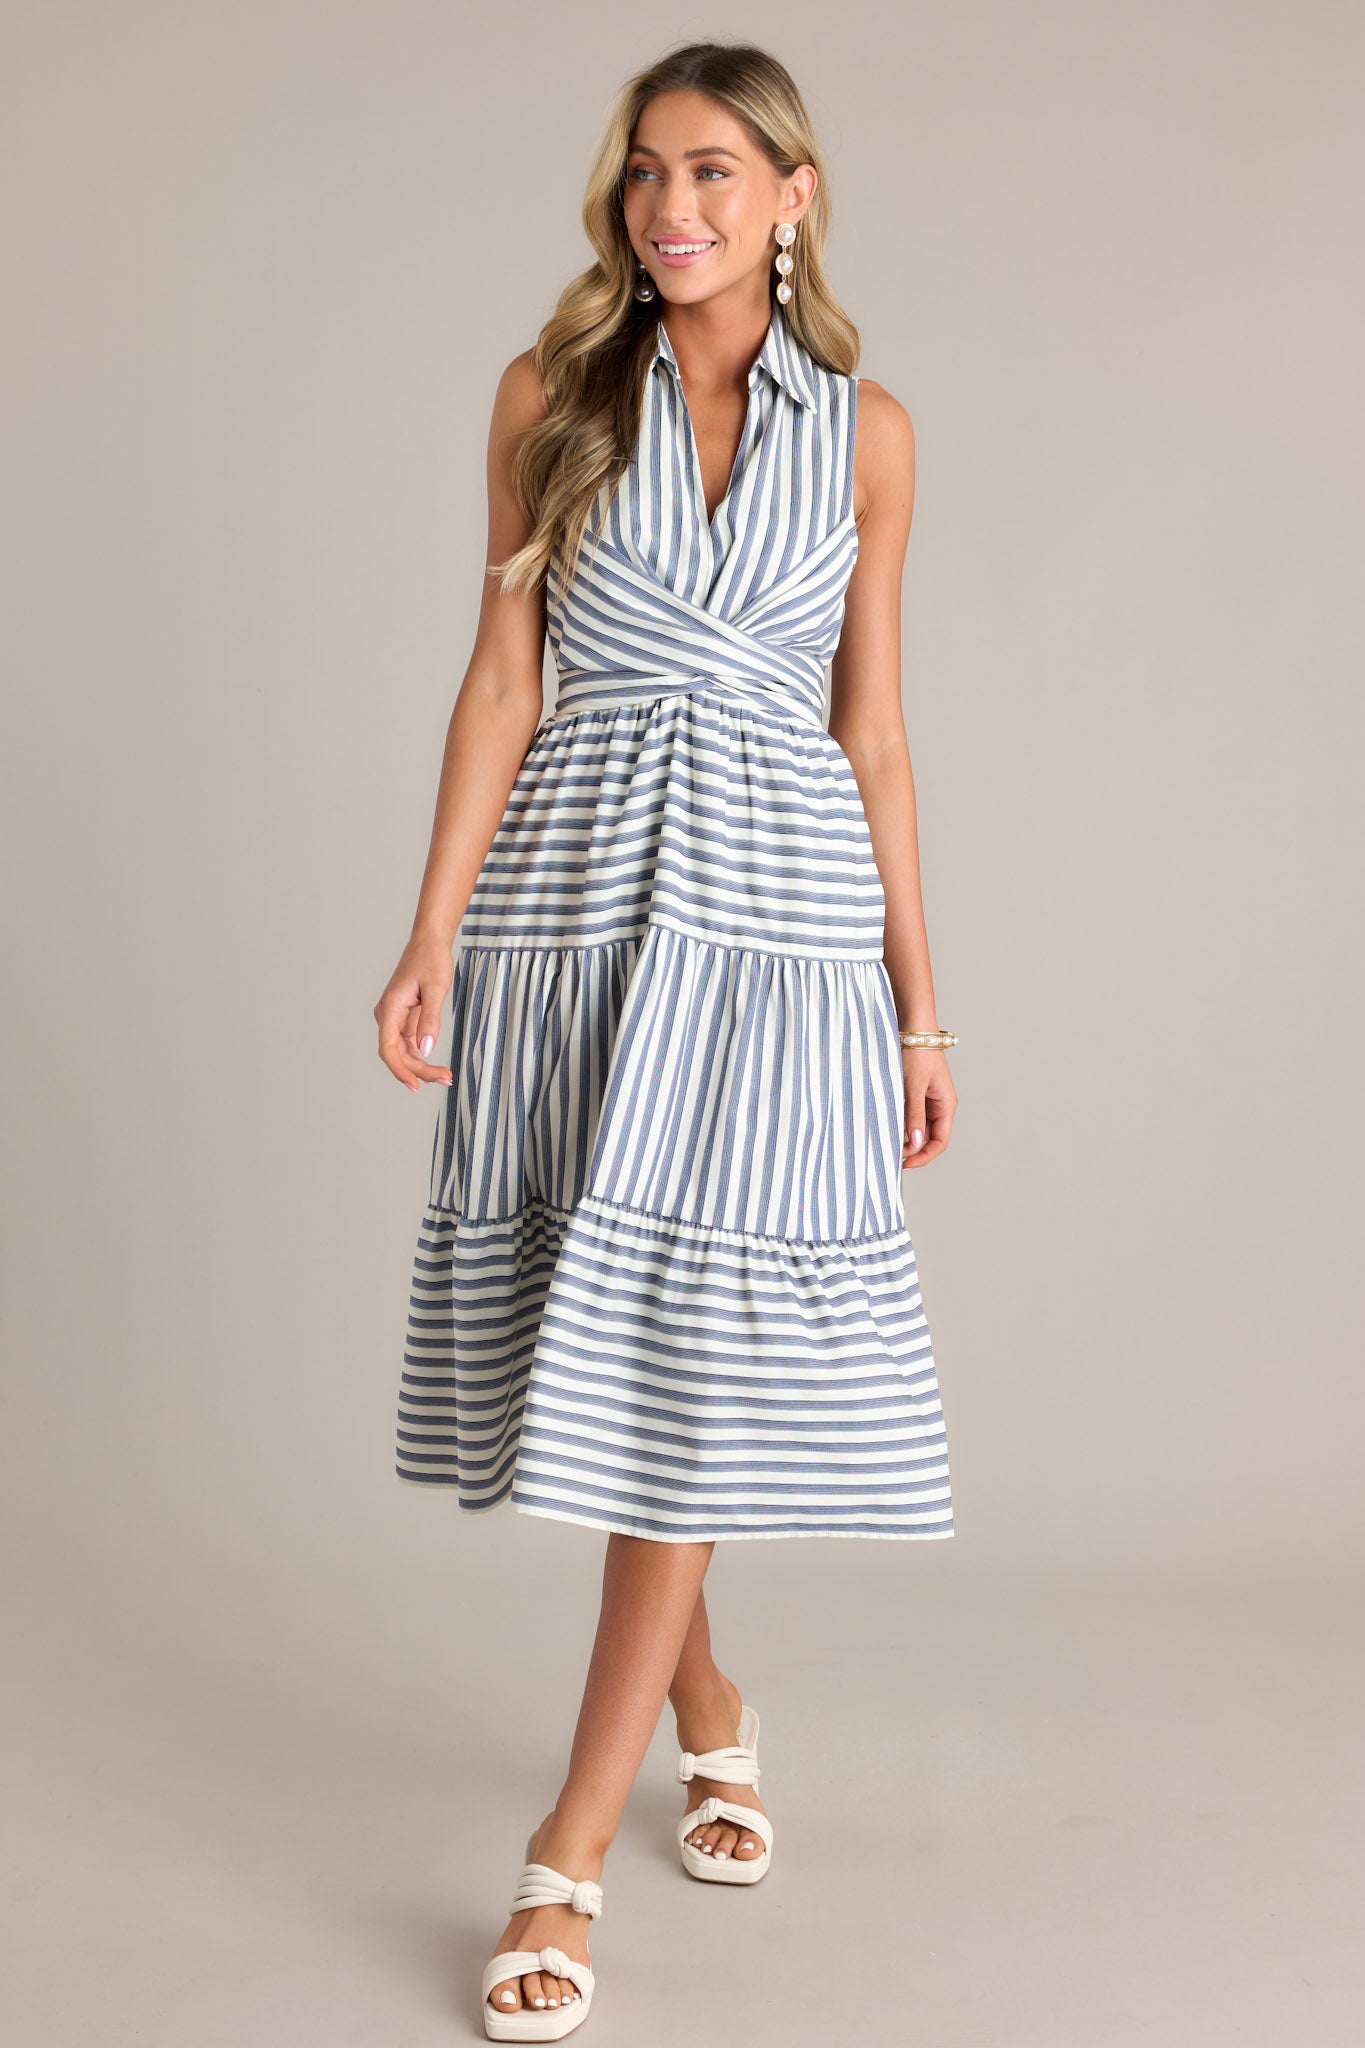 Full body view of this navy stripe midi dress that features a collared v-neckline, a self-tie waist feature that can be in the front or back, an elastic waist insert, functional hip pockets, and a sleeveless design.